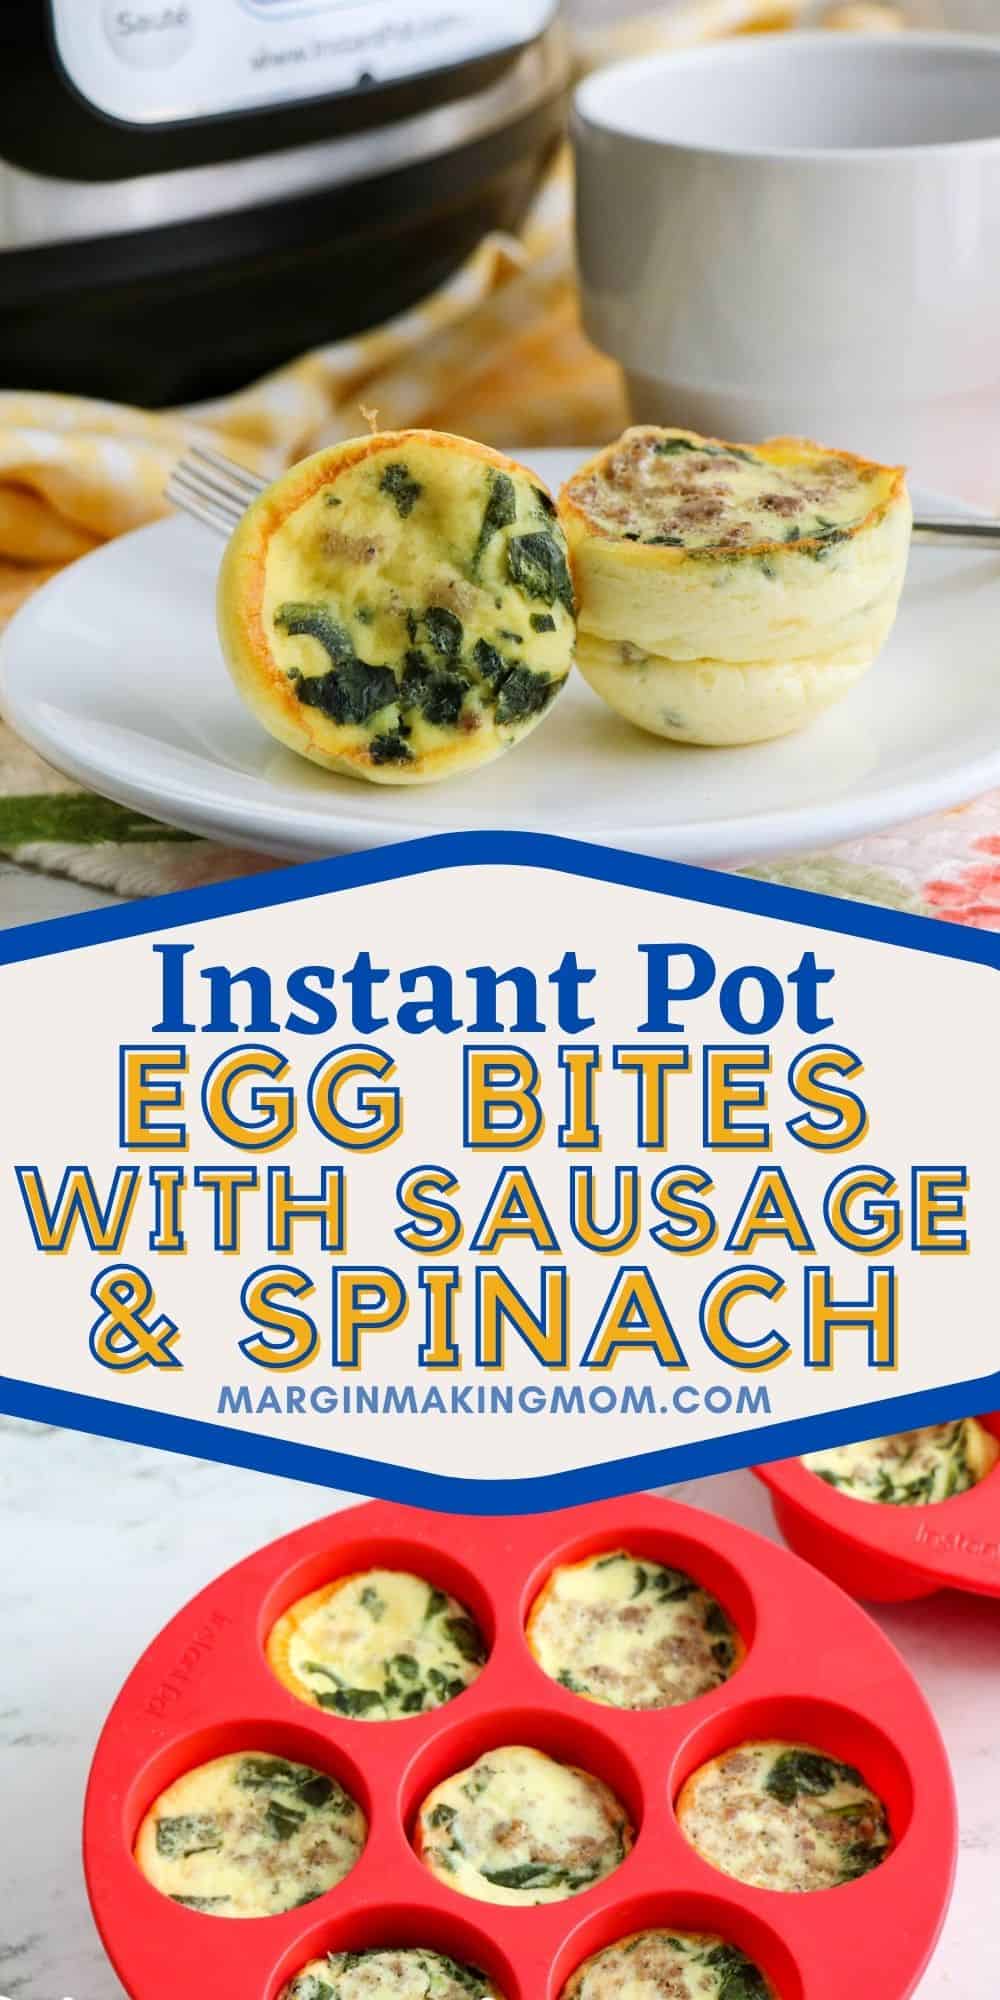 collage image of two photos--one features cooked Instant Pot egg bites on a white plate, while the other features the spinach and sausage egg bites in the Instant Pot egg mold.